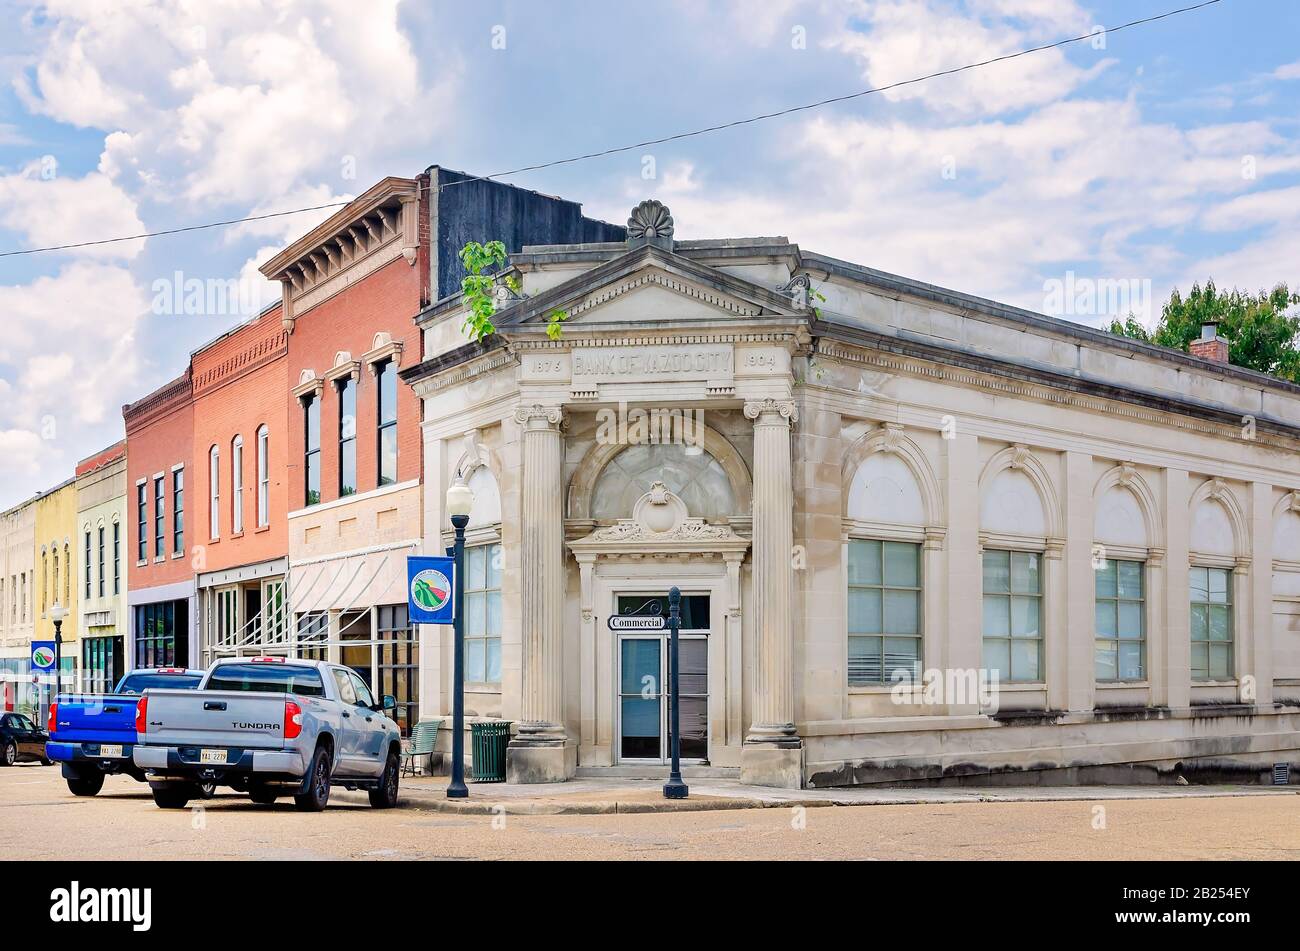 The Bank of Yazoo City is pictured, July 27, 2019, in Yazoo City, Mississippi. It is one of two historic banks in the city inspired by the Beaux-Arts. Stock Photo